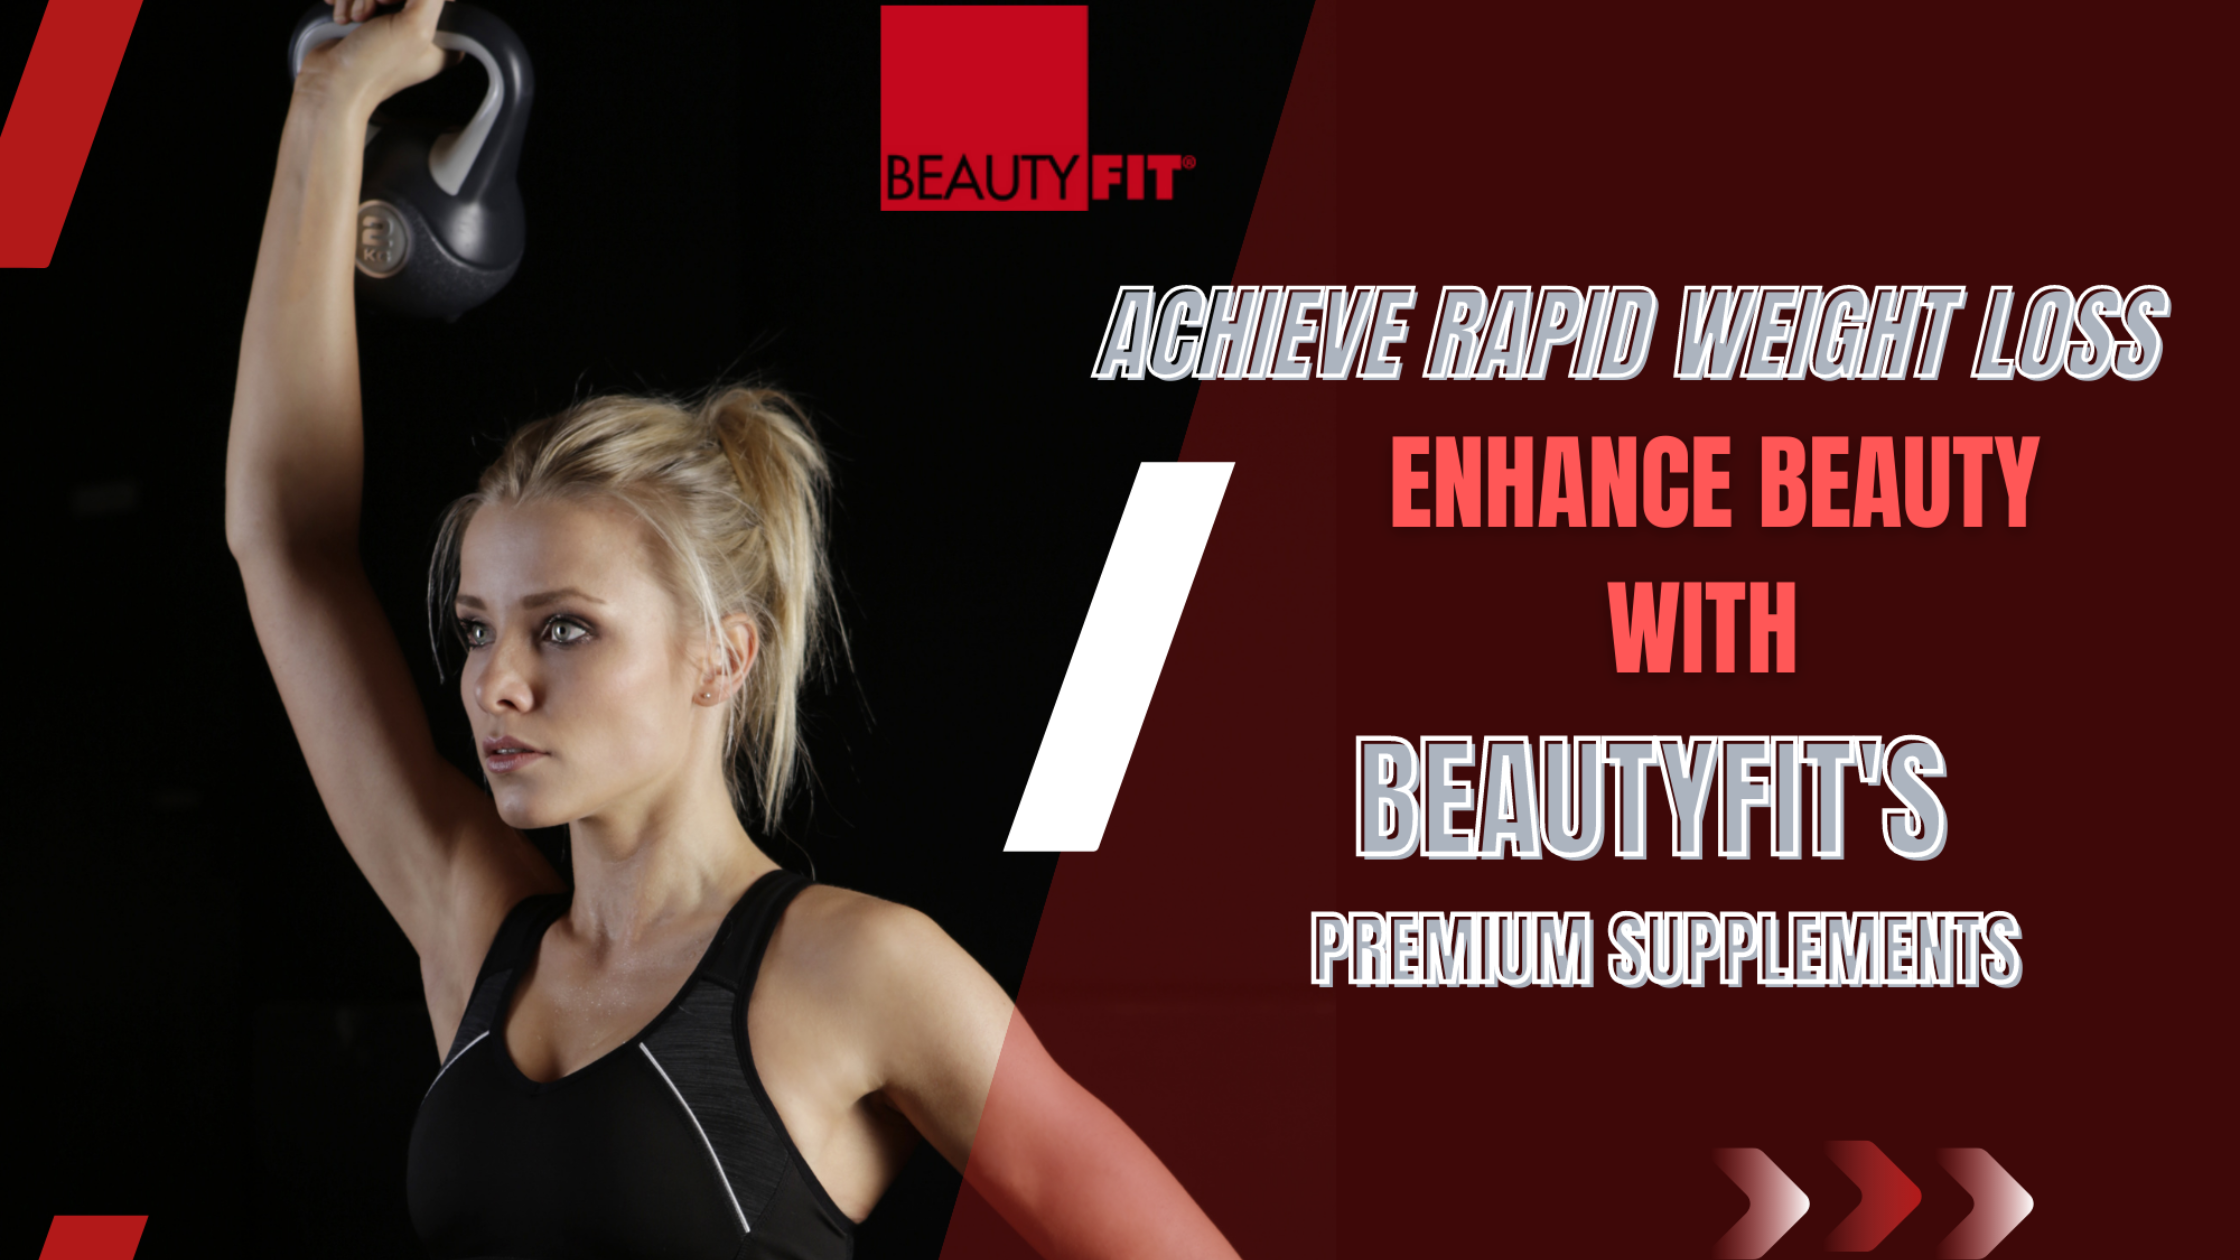 Achieve Rapid Weight Loss and Enhance Beauty with BeautyFit's Premium Supplements